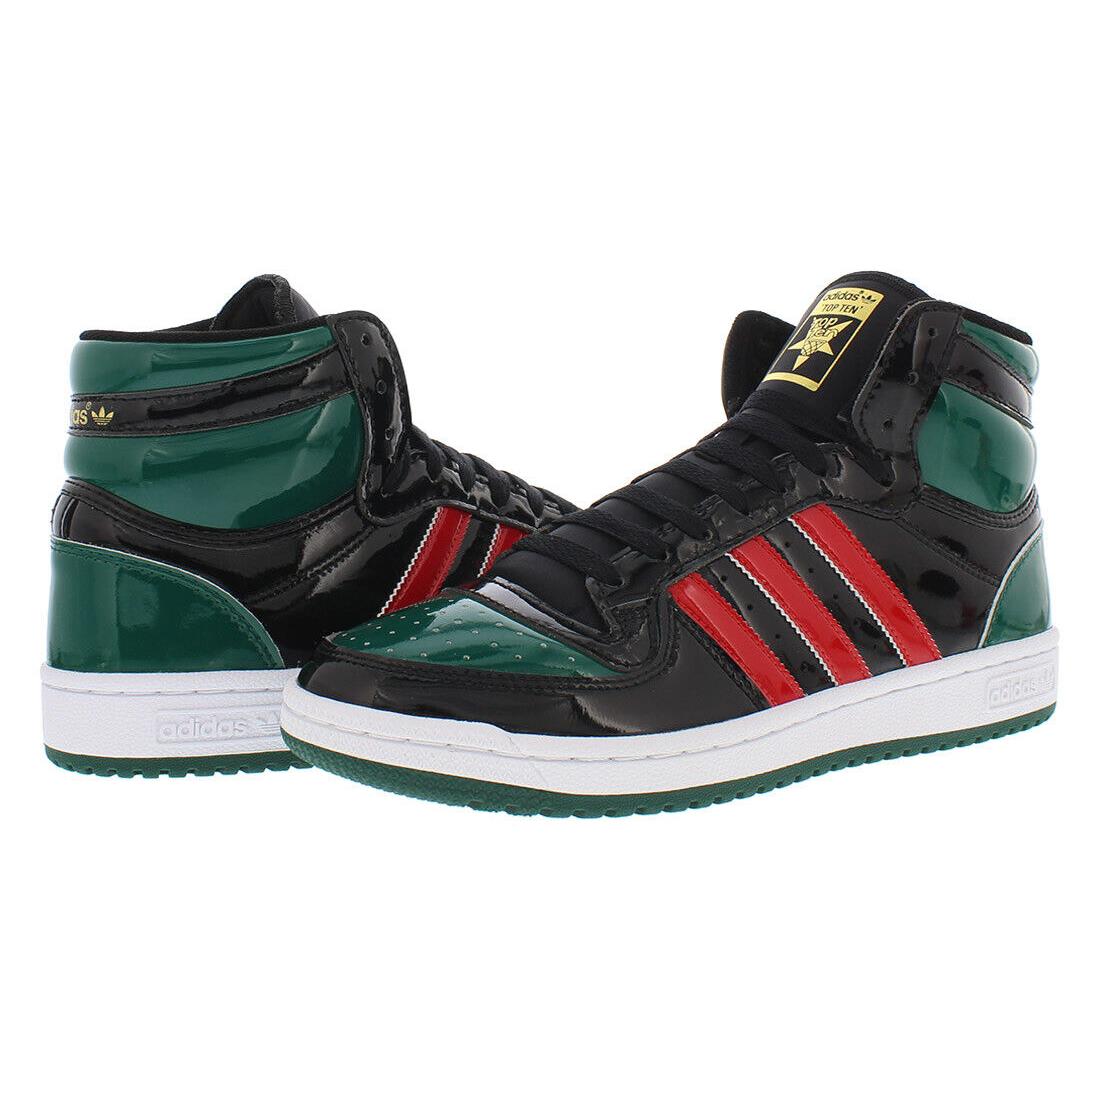 Adidas Top Ten Rb Mens Shoes Size 9 Color: Black/red/green